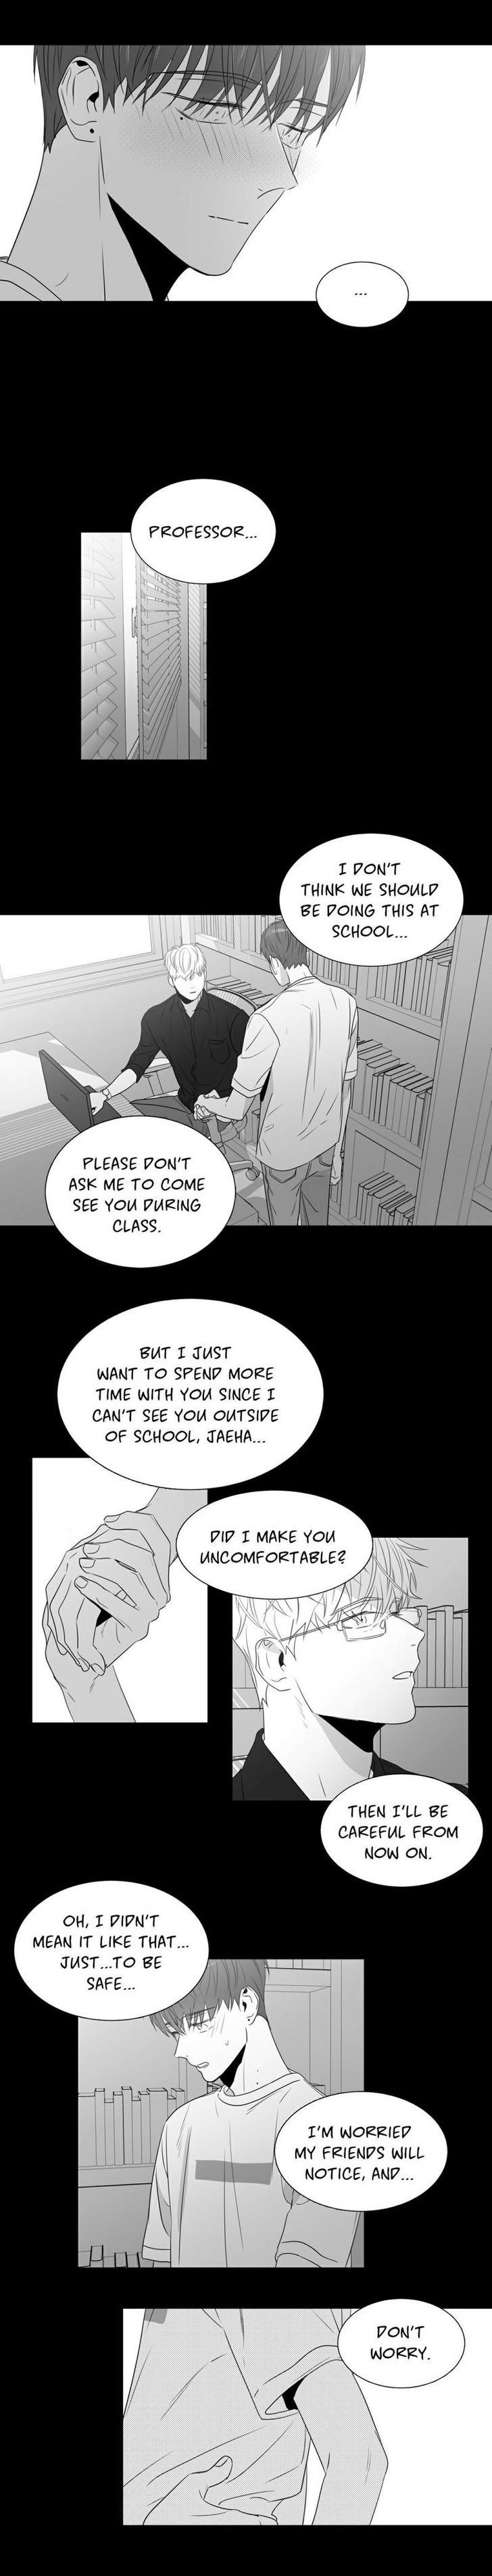 Lover Boy (Lezhin) Chapter 047.1 page 5